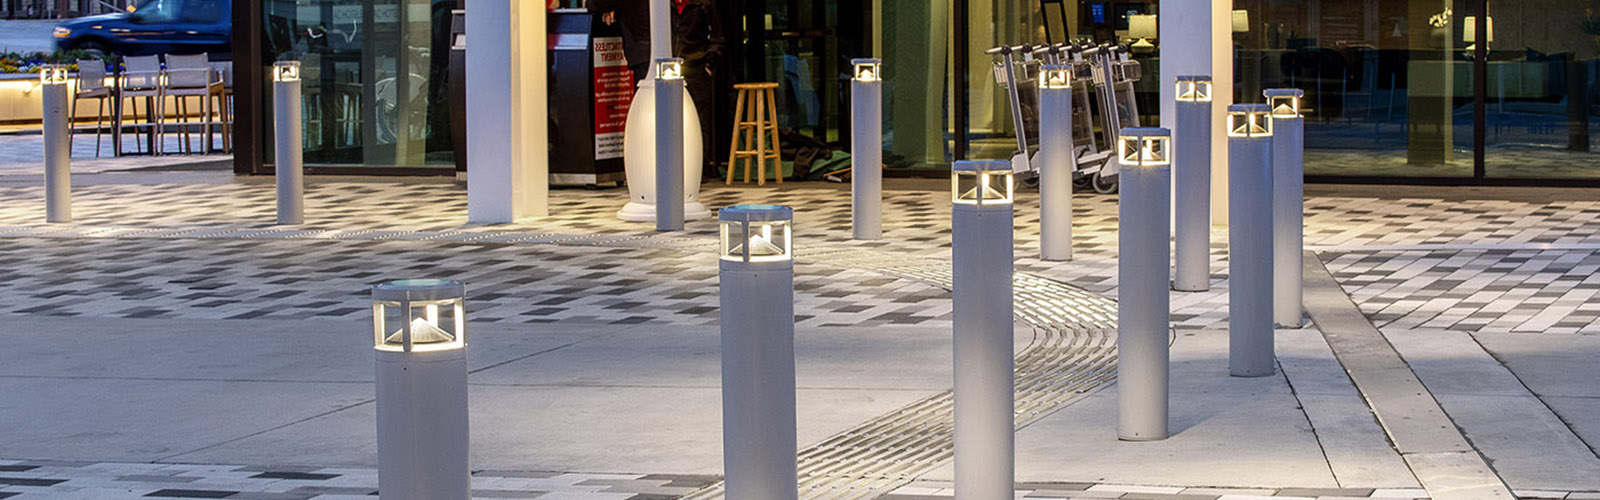 A walkway guarded by commercial outdoor bollard lighting